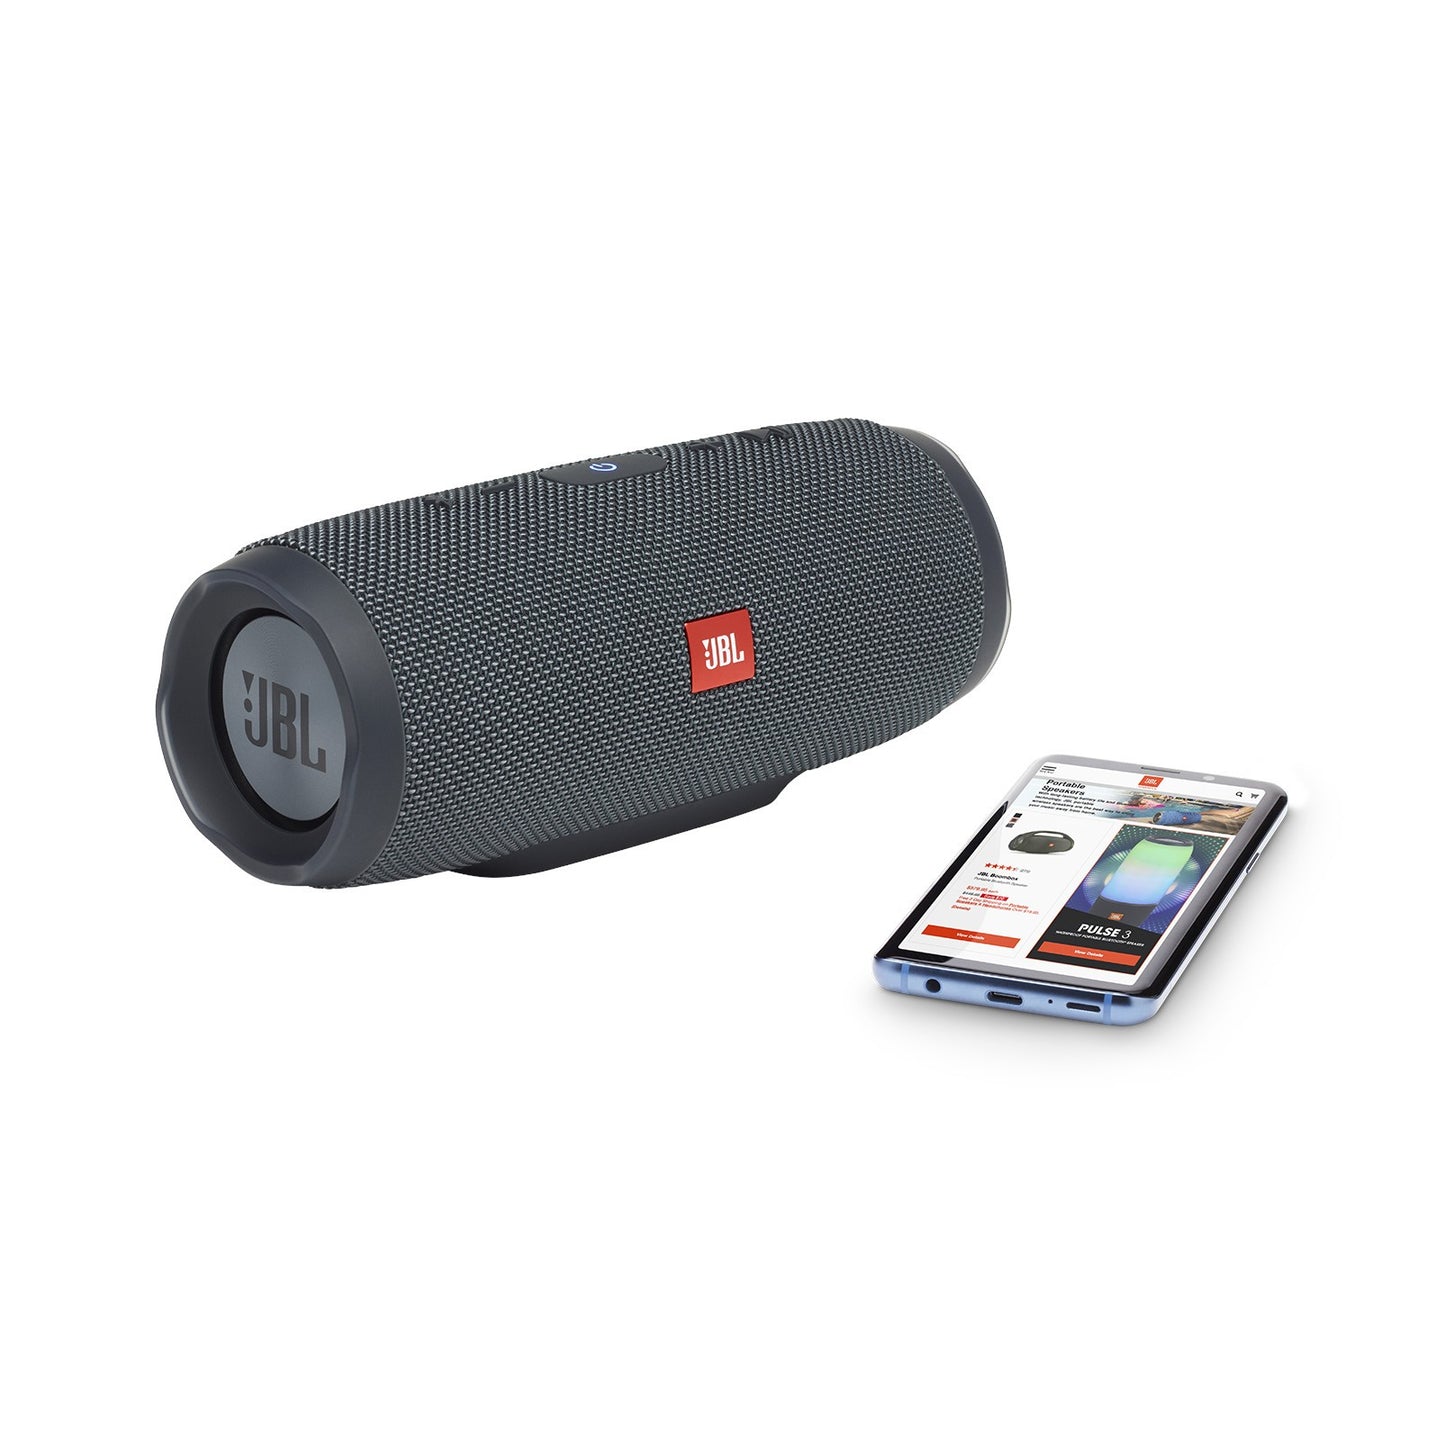 JBL Charge Essential Portable Bluetooth Speaker, IPX7 Waterproof Bluetooth Speaker, USB Port, Up to 20h of Battery Life